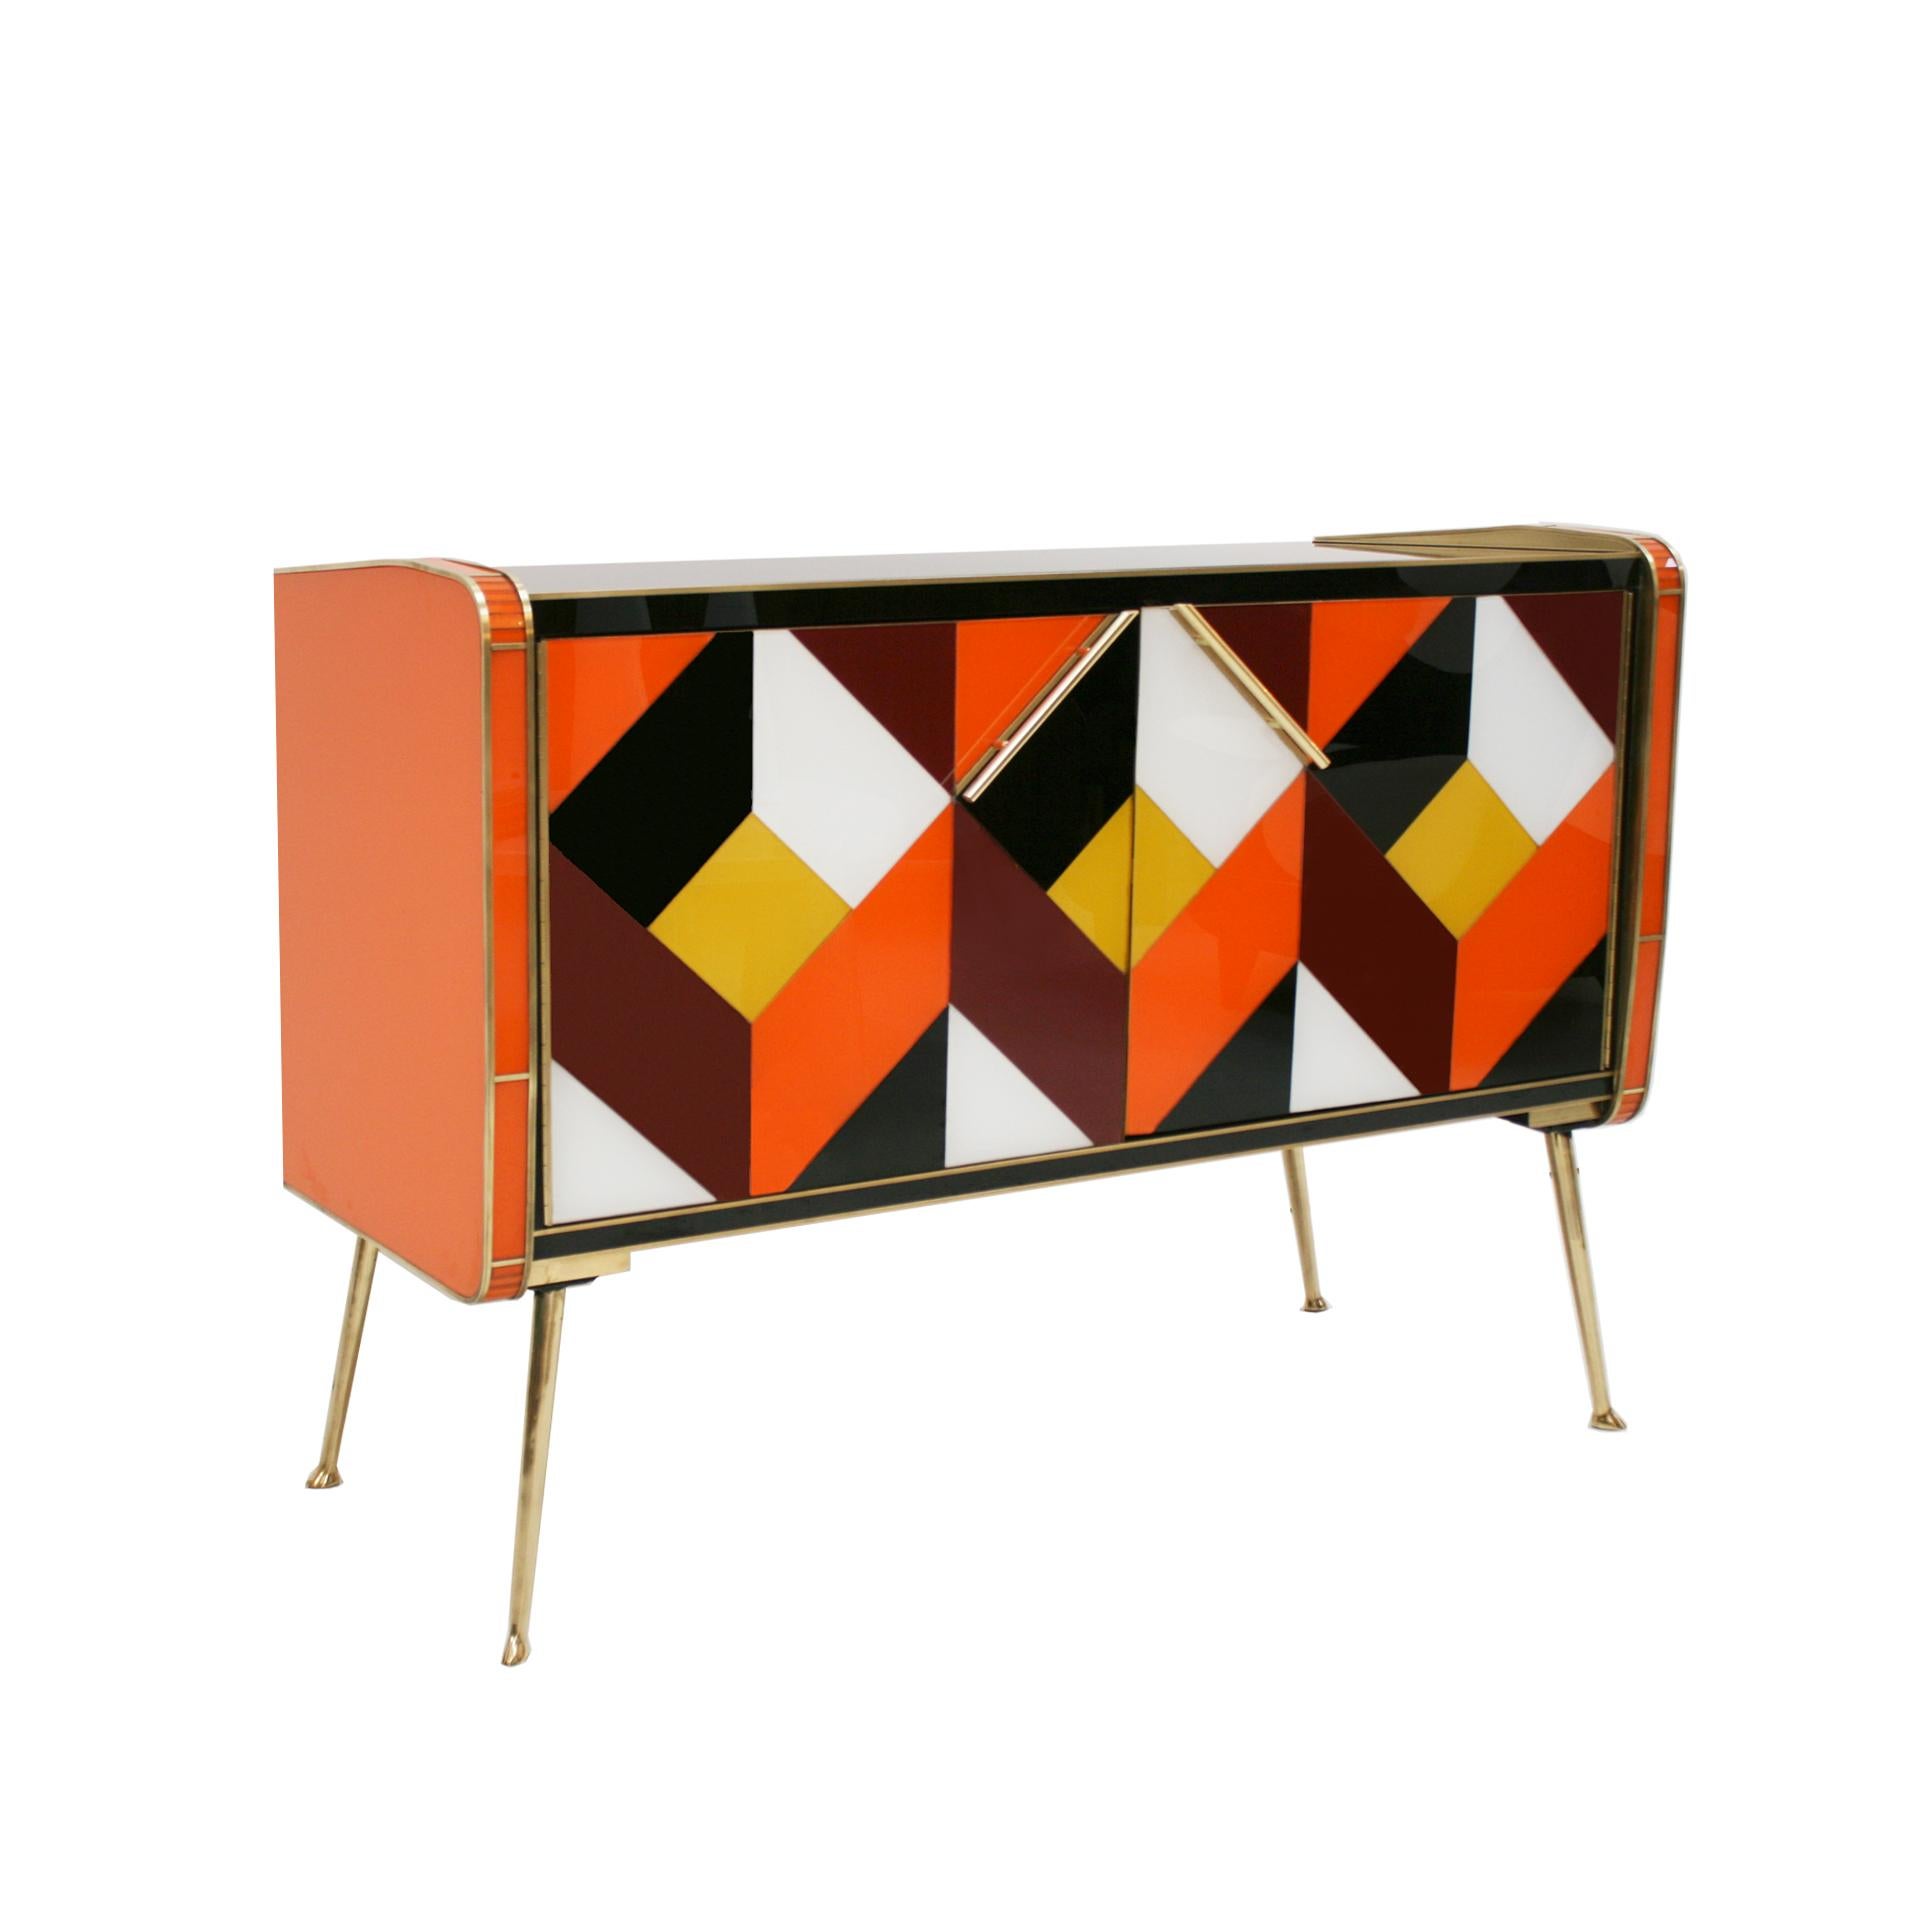 Italian sideboard composed of two folding doors and one shelve inside. Original wood structure from 1950s covered with colored glass. Handles, profiles and legs made of solid brass. Italian manufacture.

Our main target is customer satisfaction, so